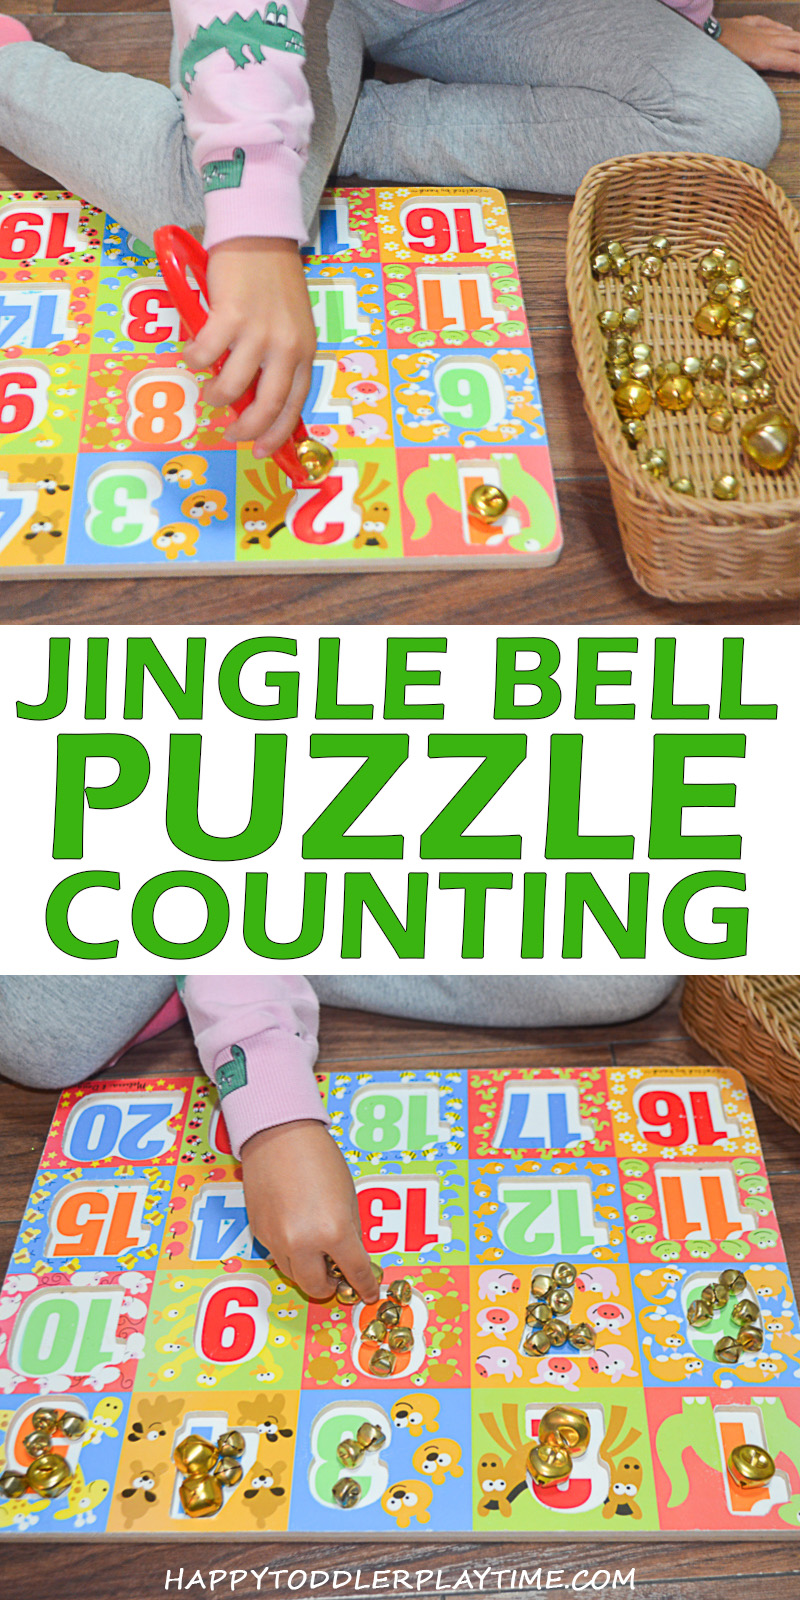 JINGLE BELL PUZZLE COUNTING pin